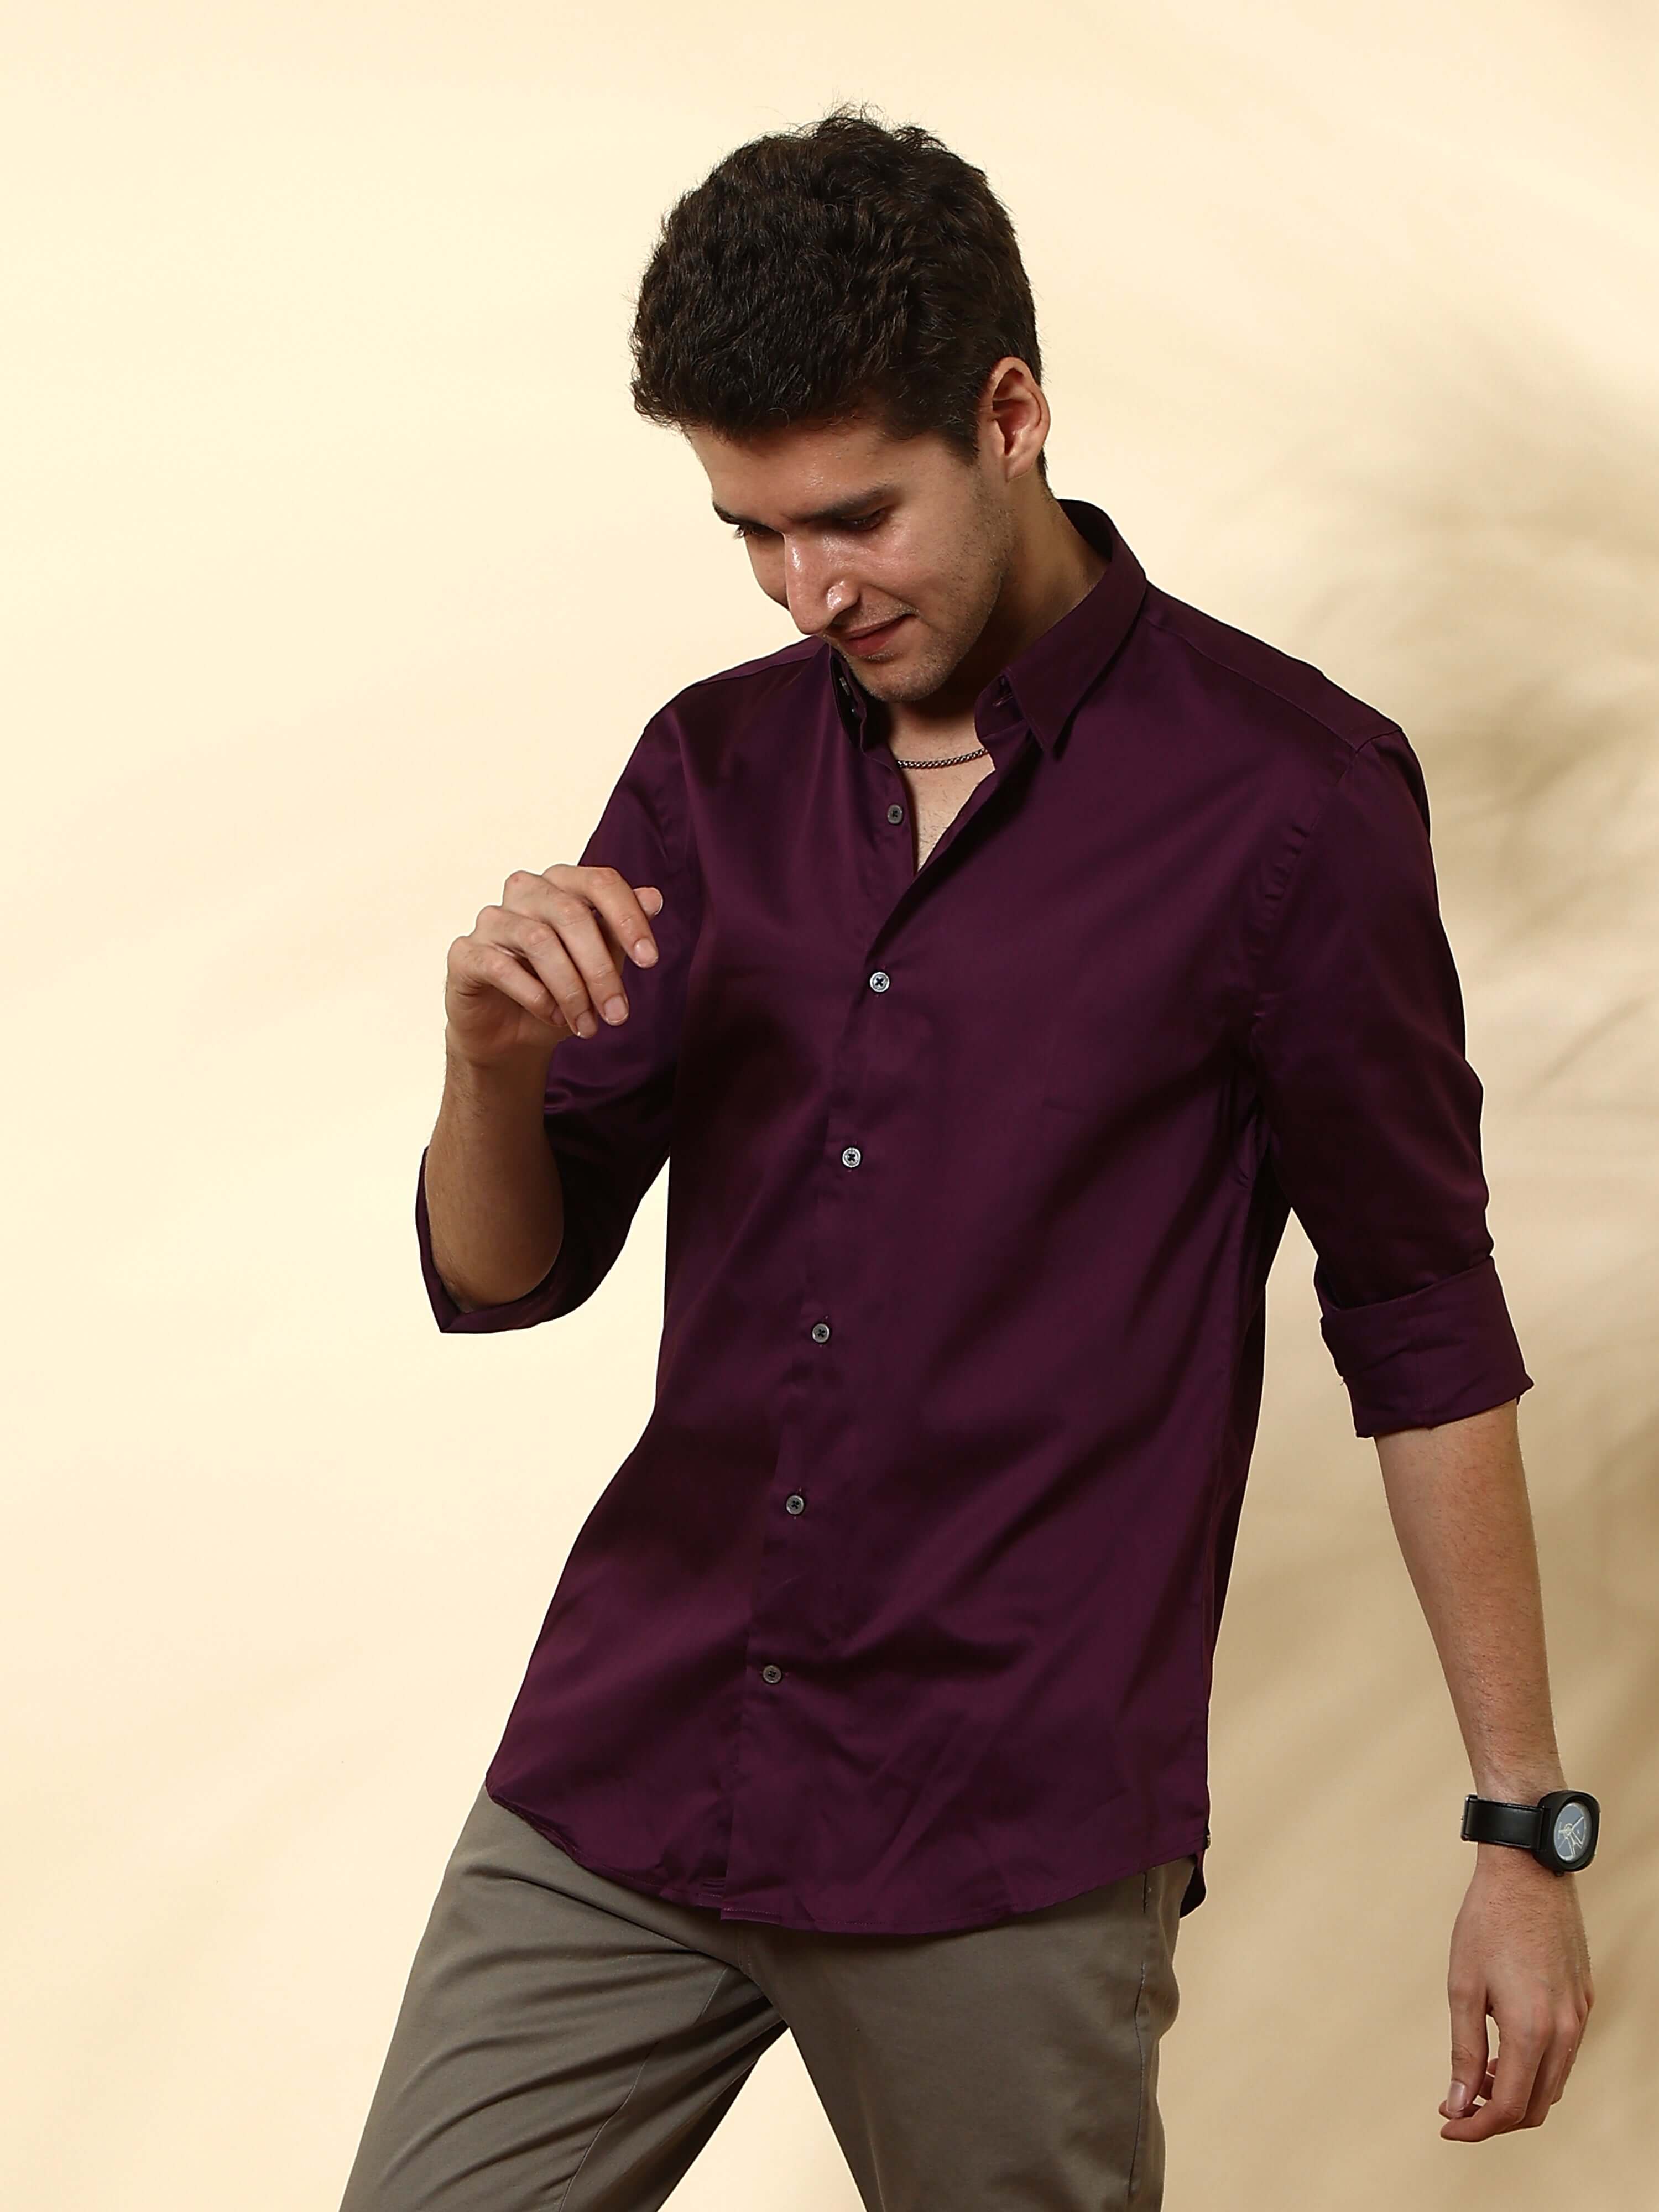 Curious Purple Solid Casual Full Sleeve Shirt